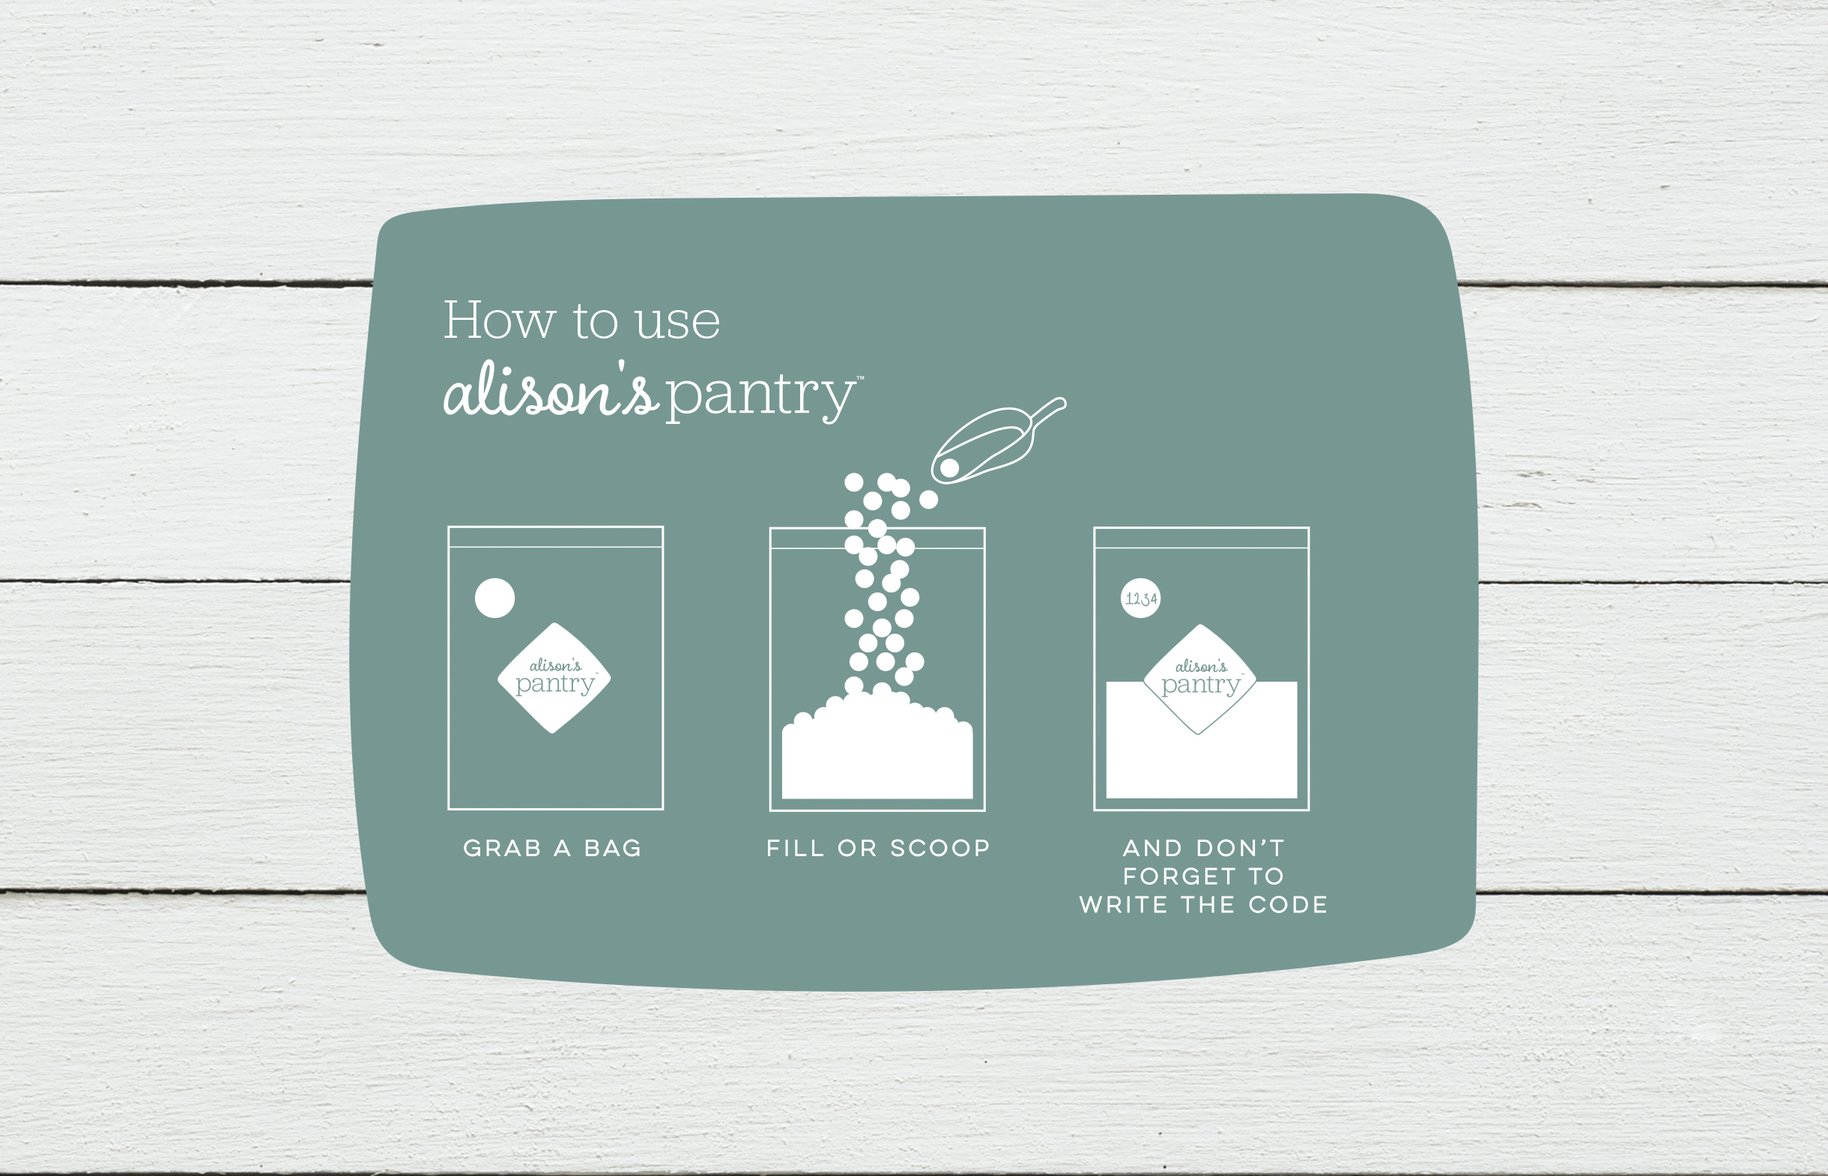 Alison's Pantry 'how to use' graphic